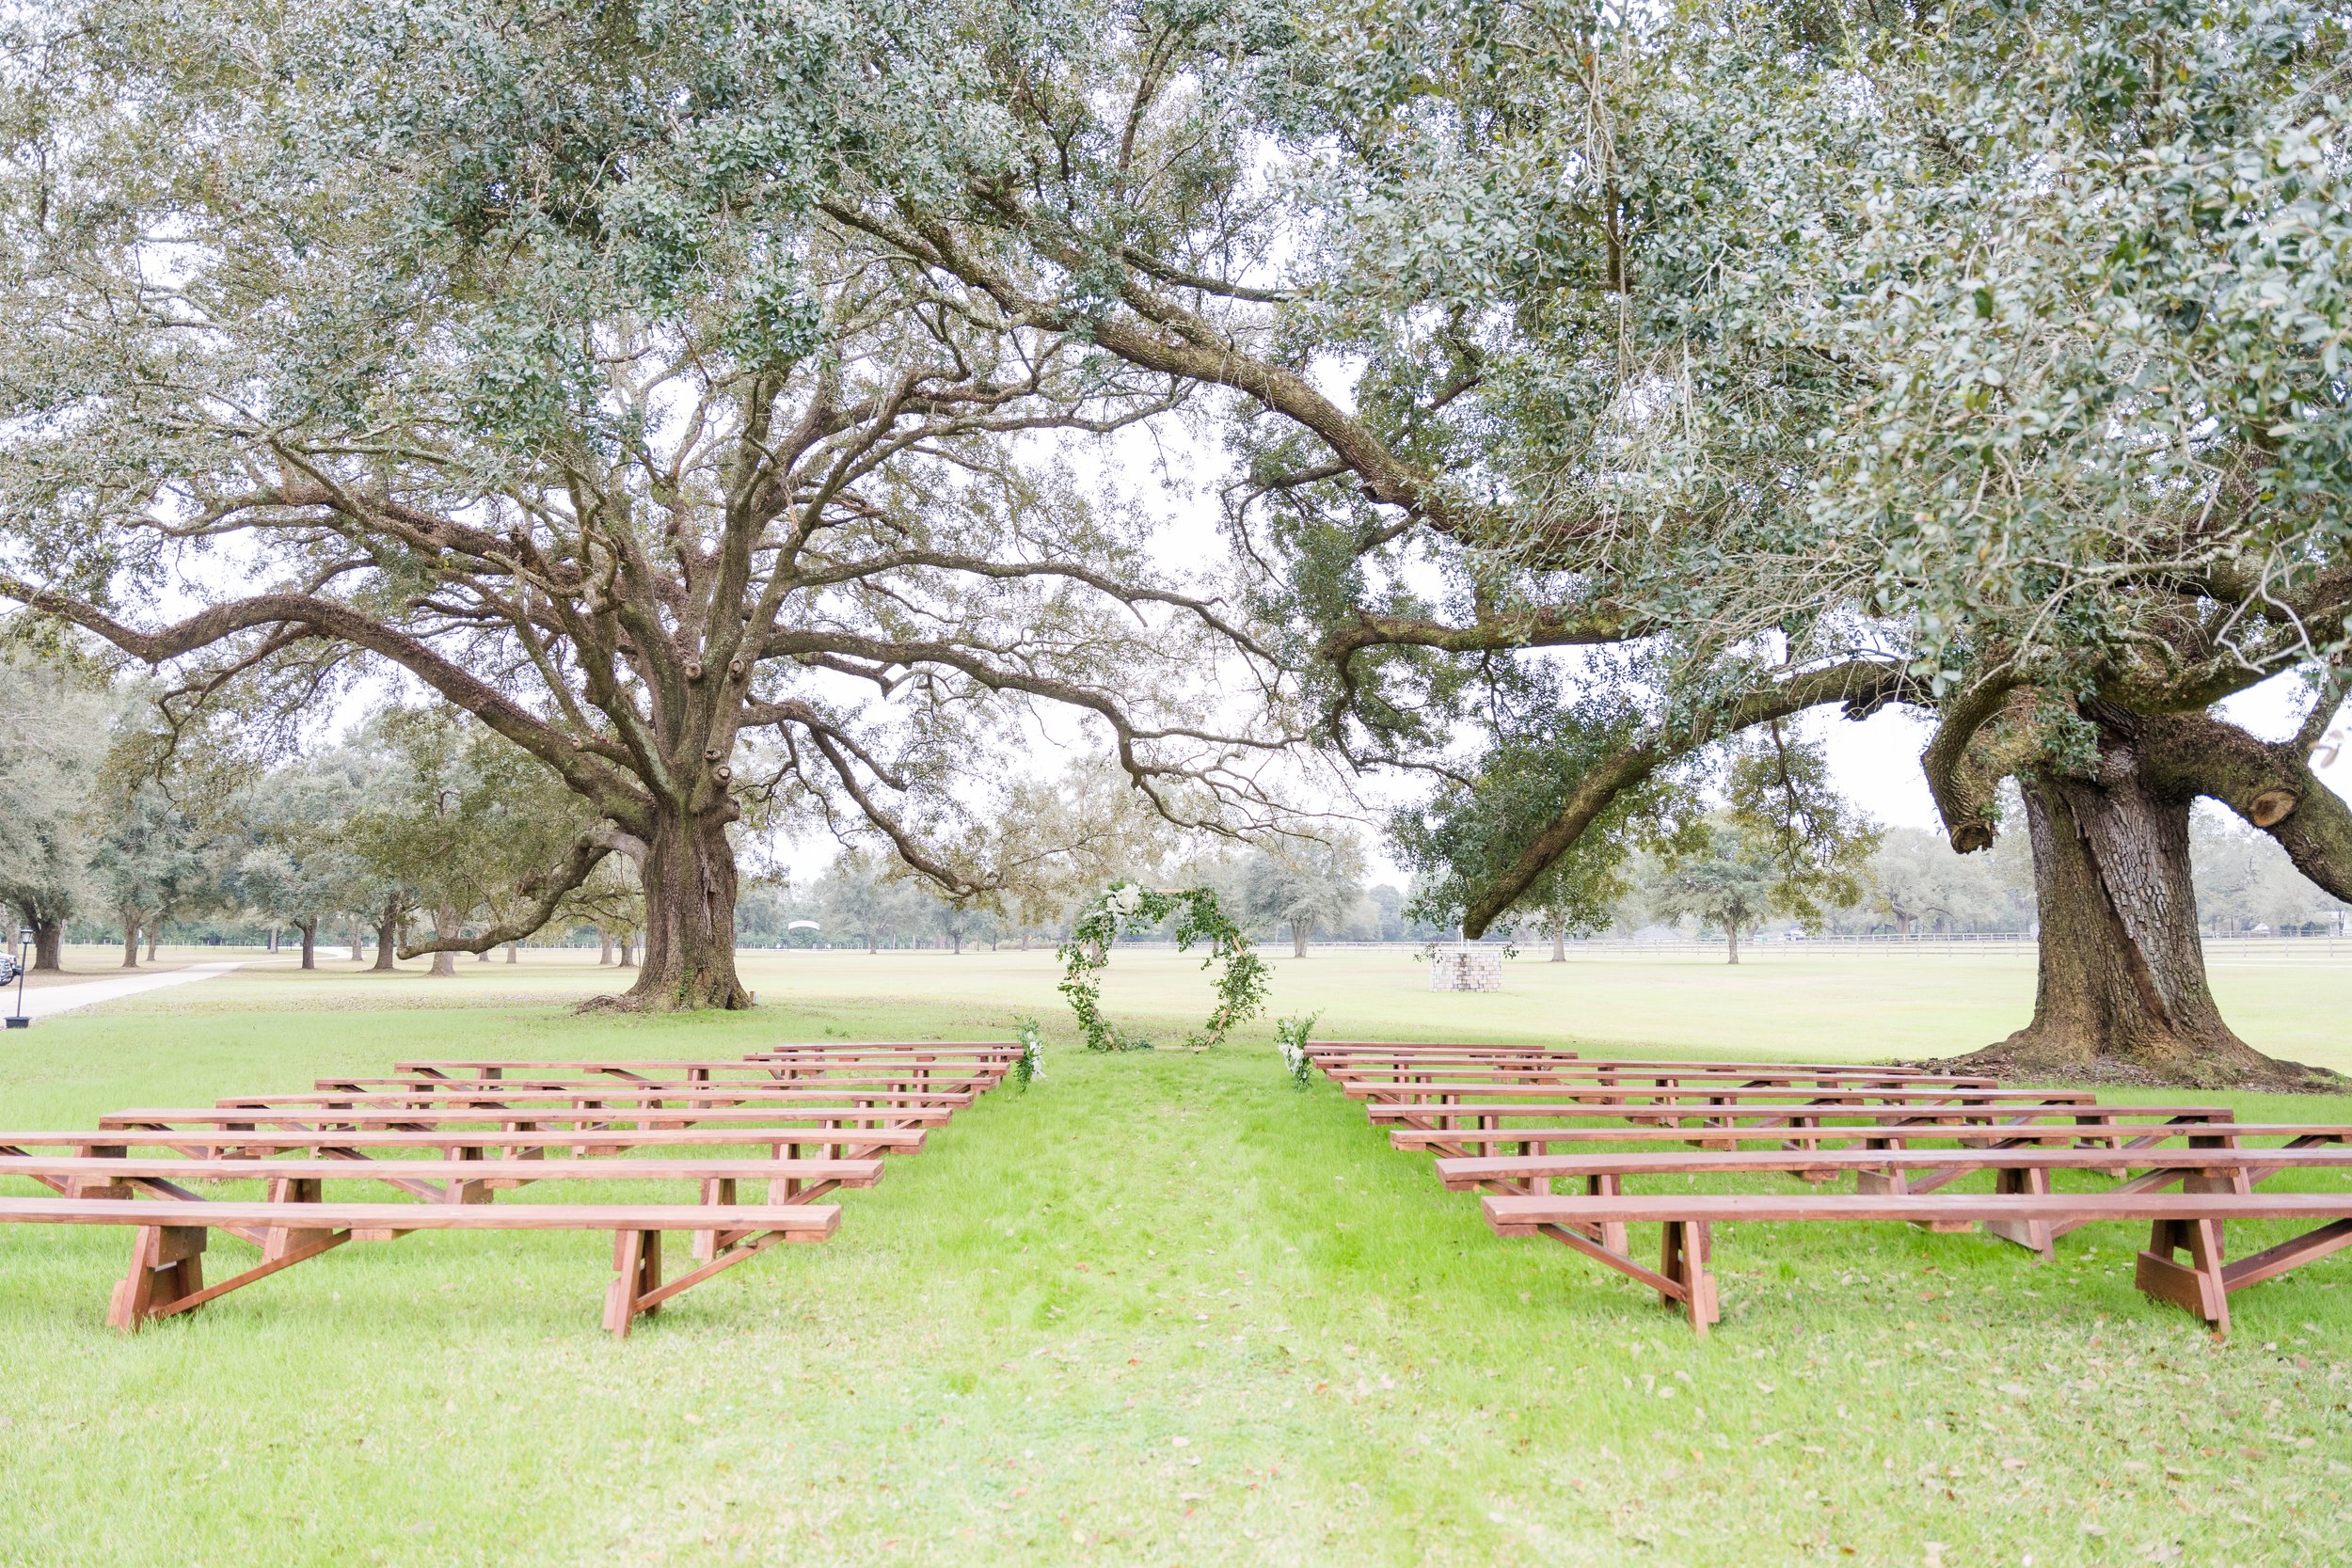 Hatcher Farms Wedding Photographed by Kristen Marcus Photography